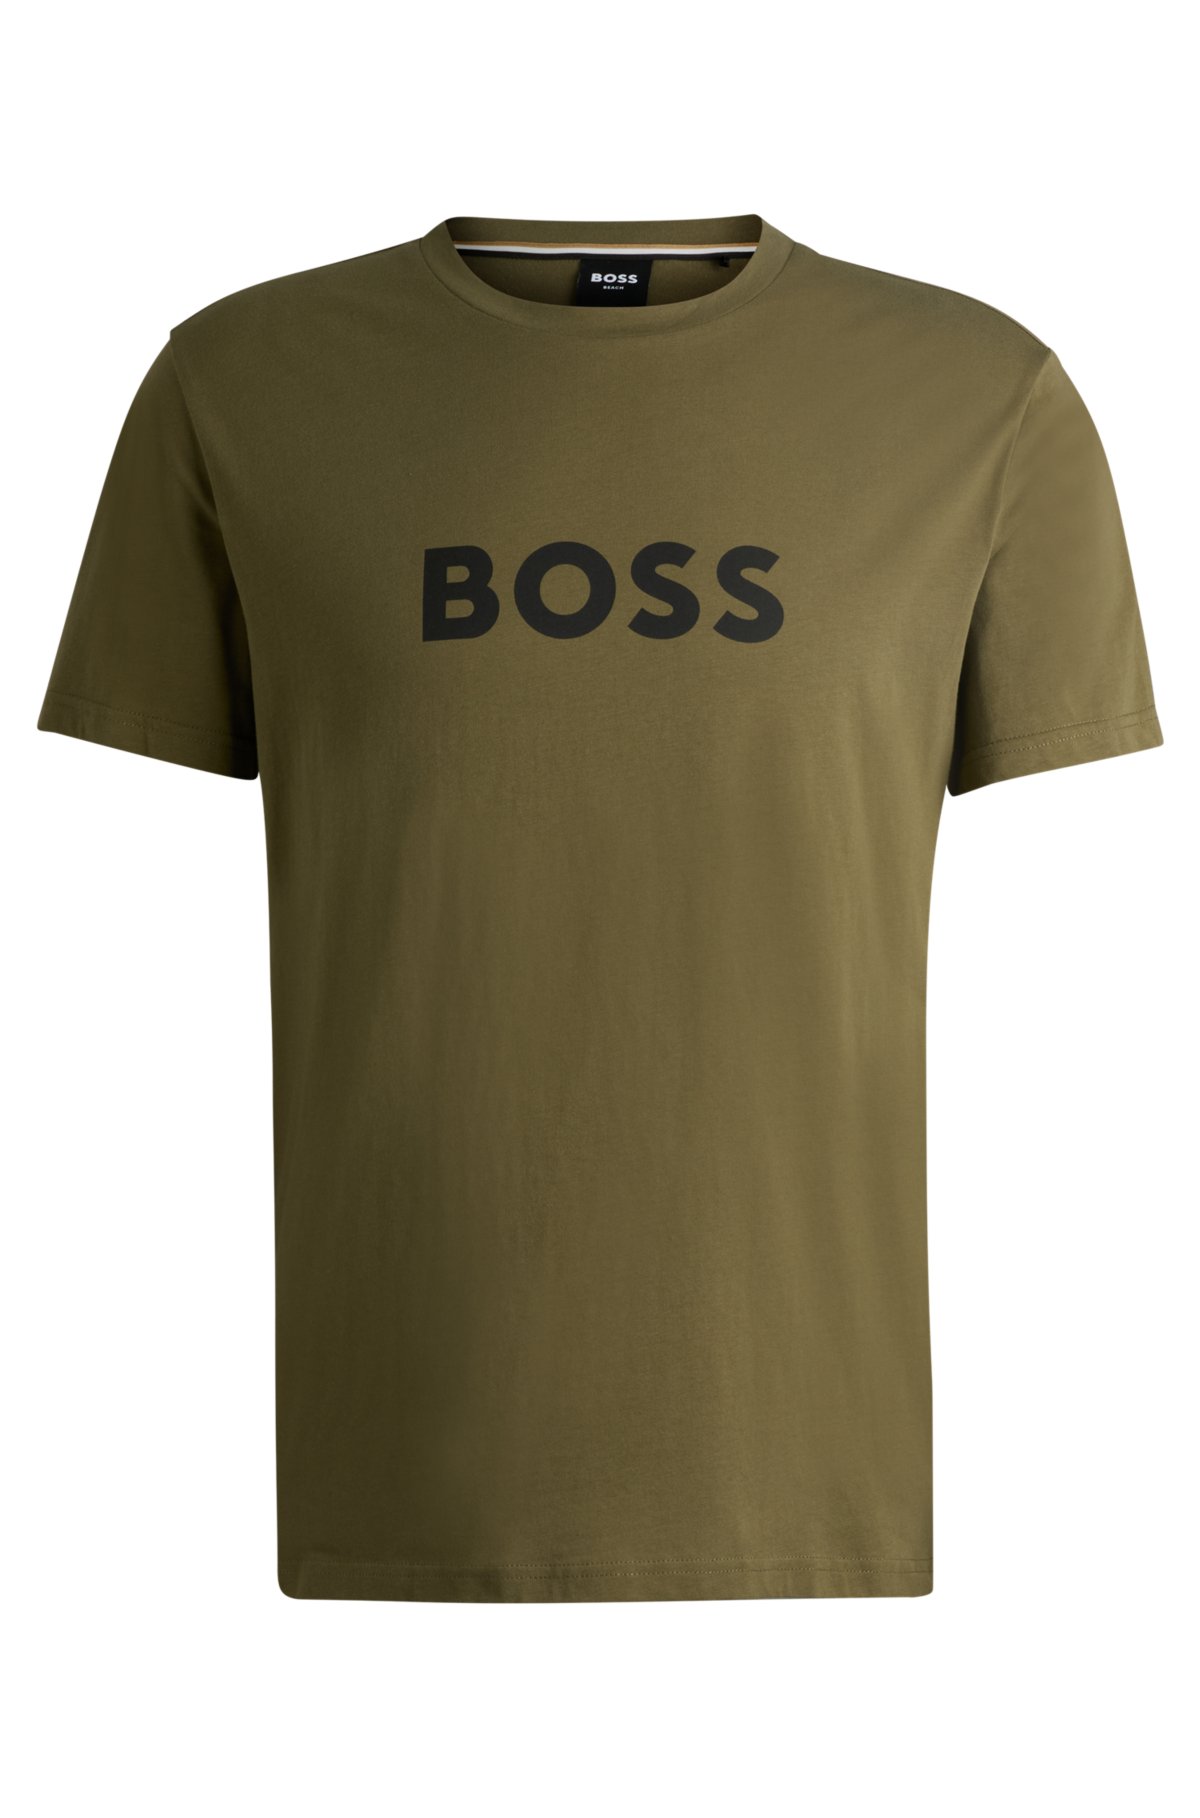 Cotton-jersey regular-fit T-shirt with SPF 50+ UV protection, Khaki